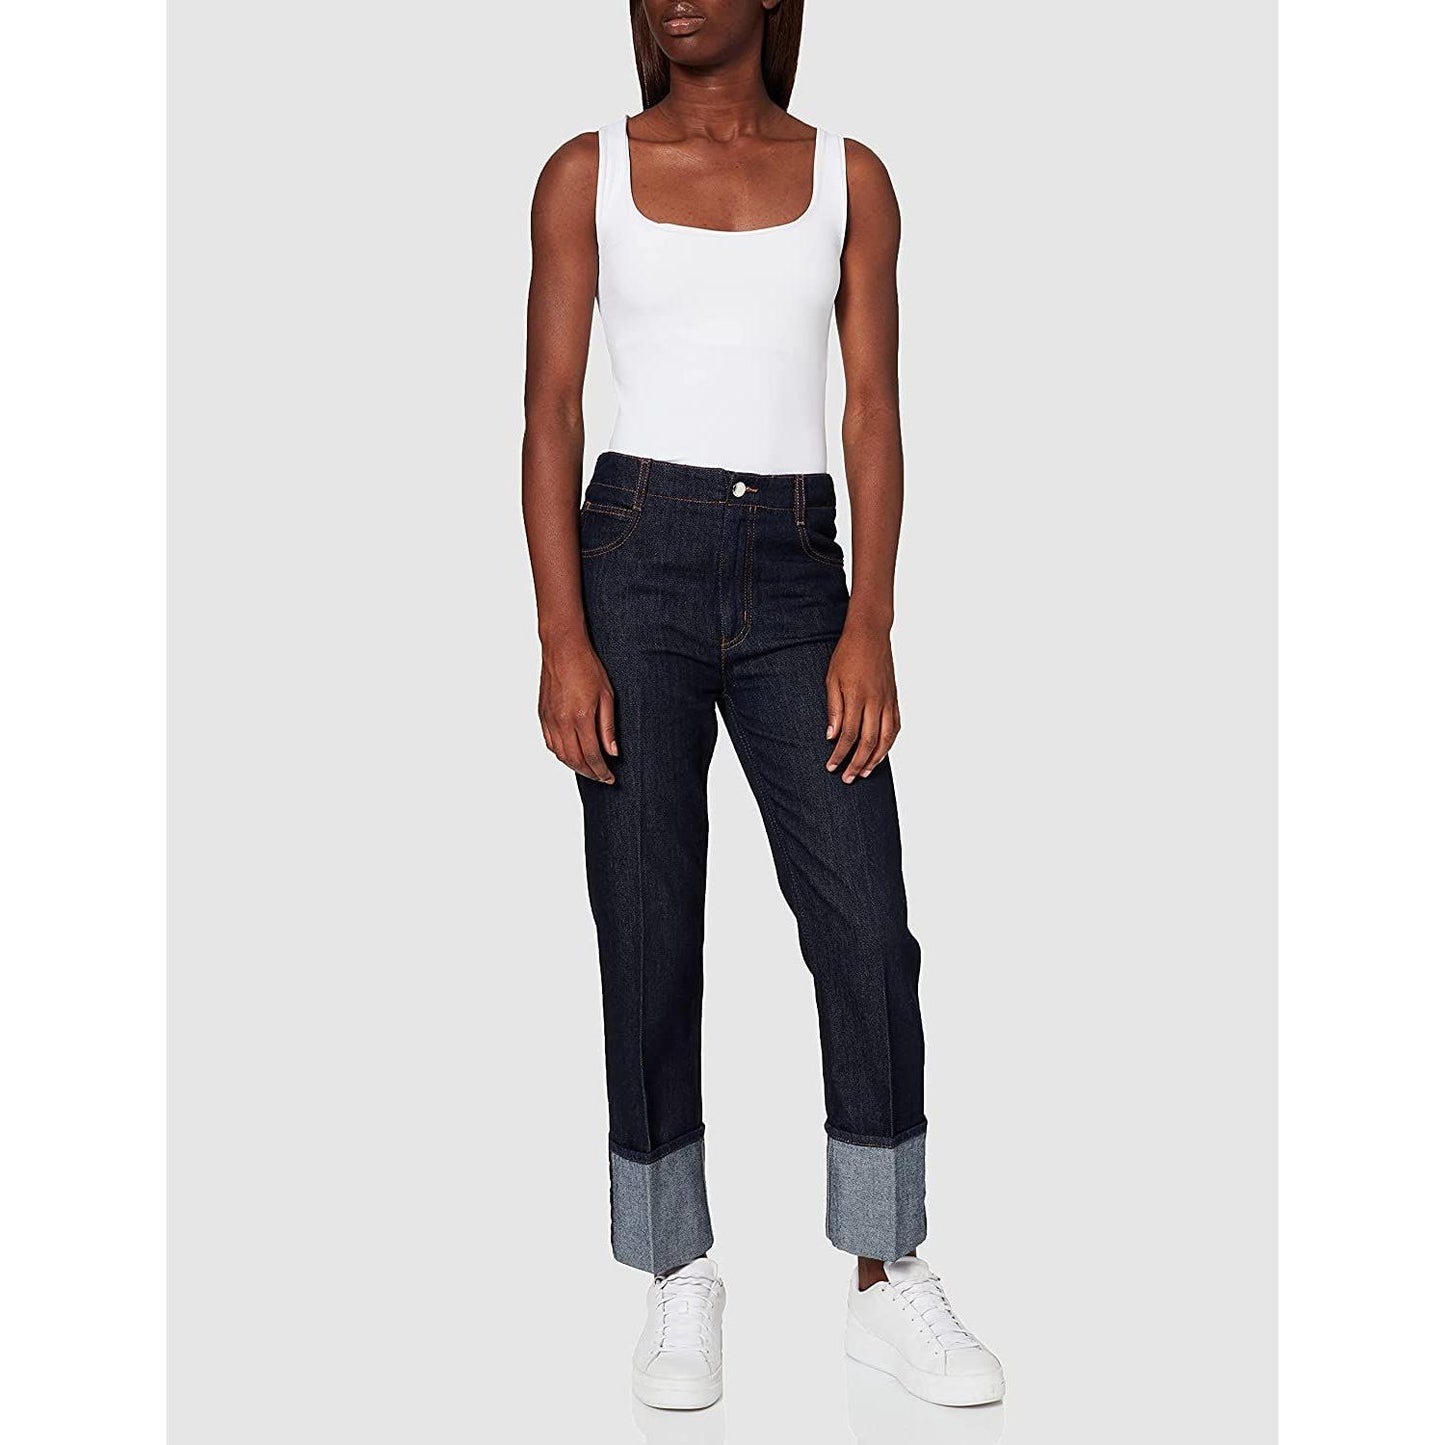 Love Moschino Chic Cotton Denim Jeans with Fleece Accent chic-cotton-denim-jeans-with-fleece-accent